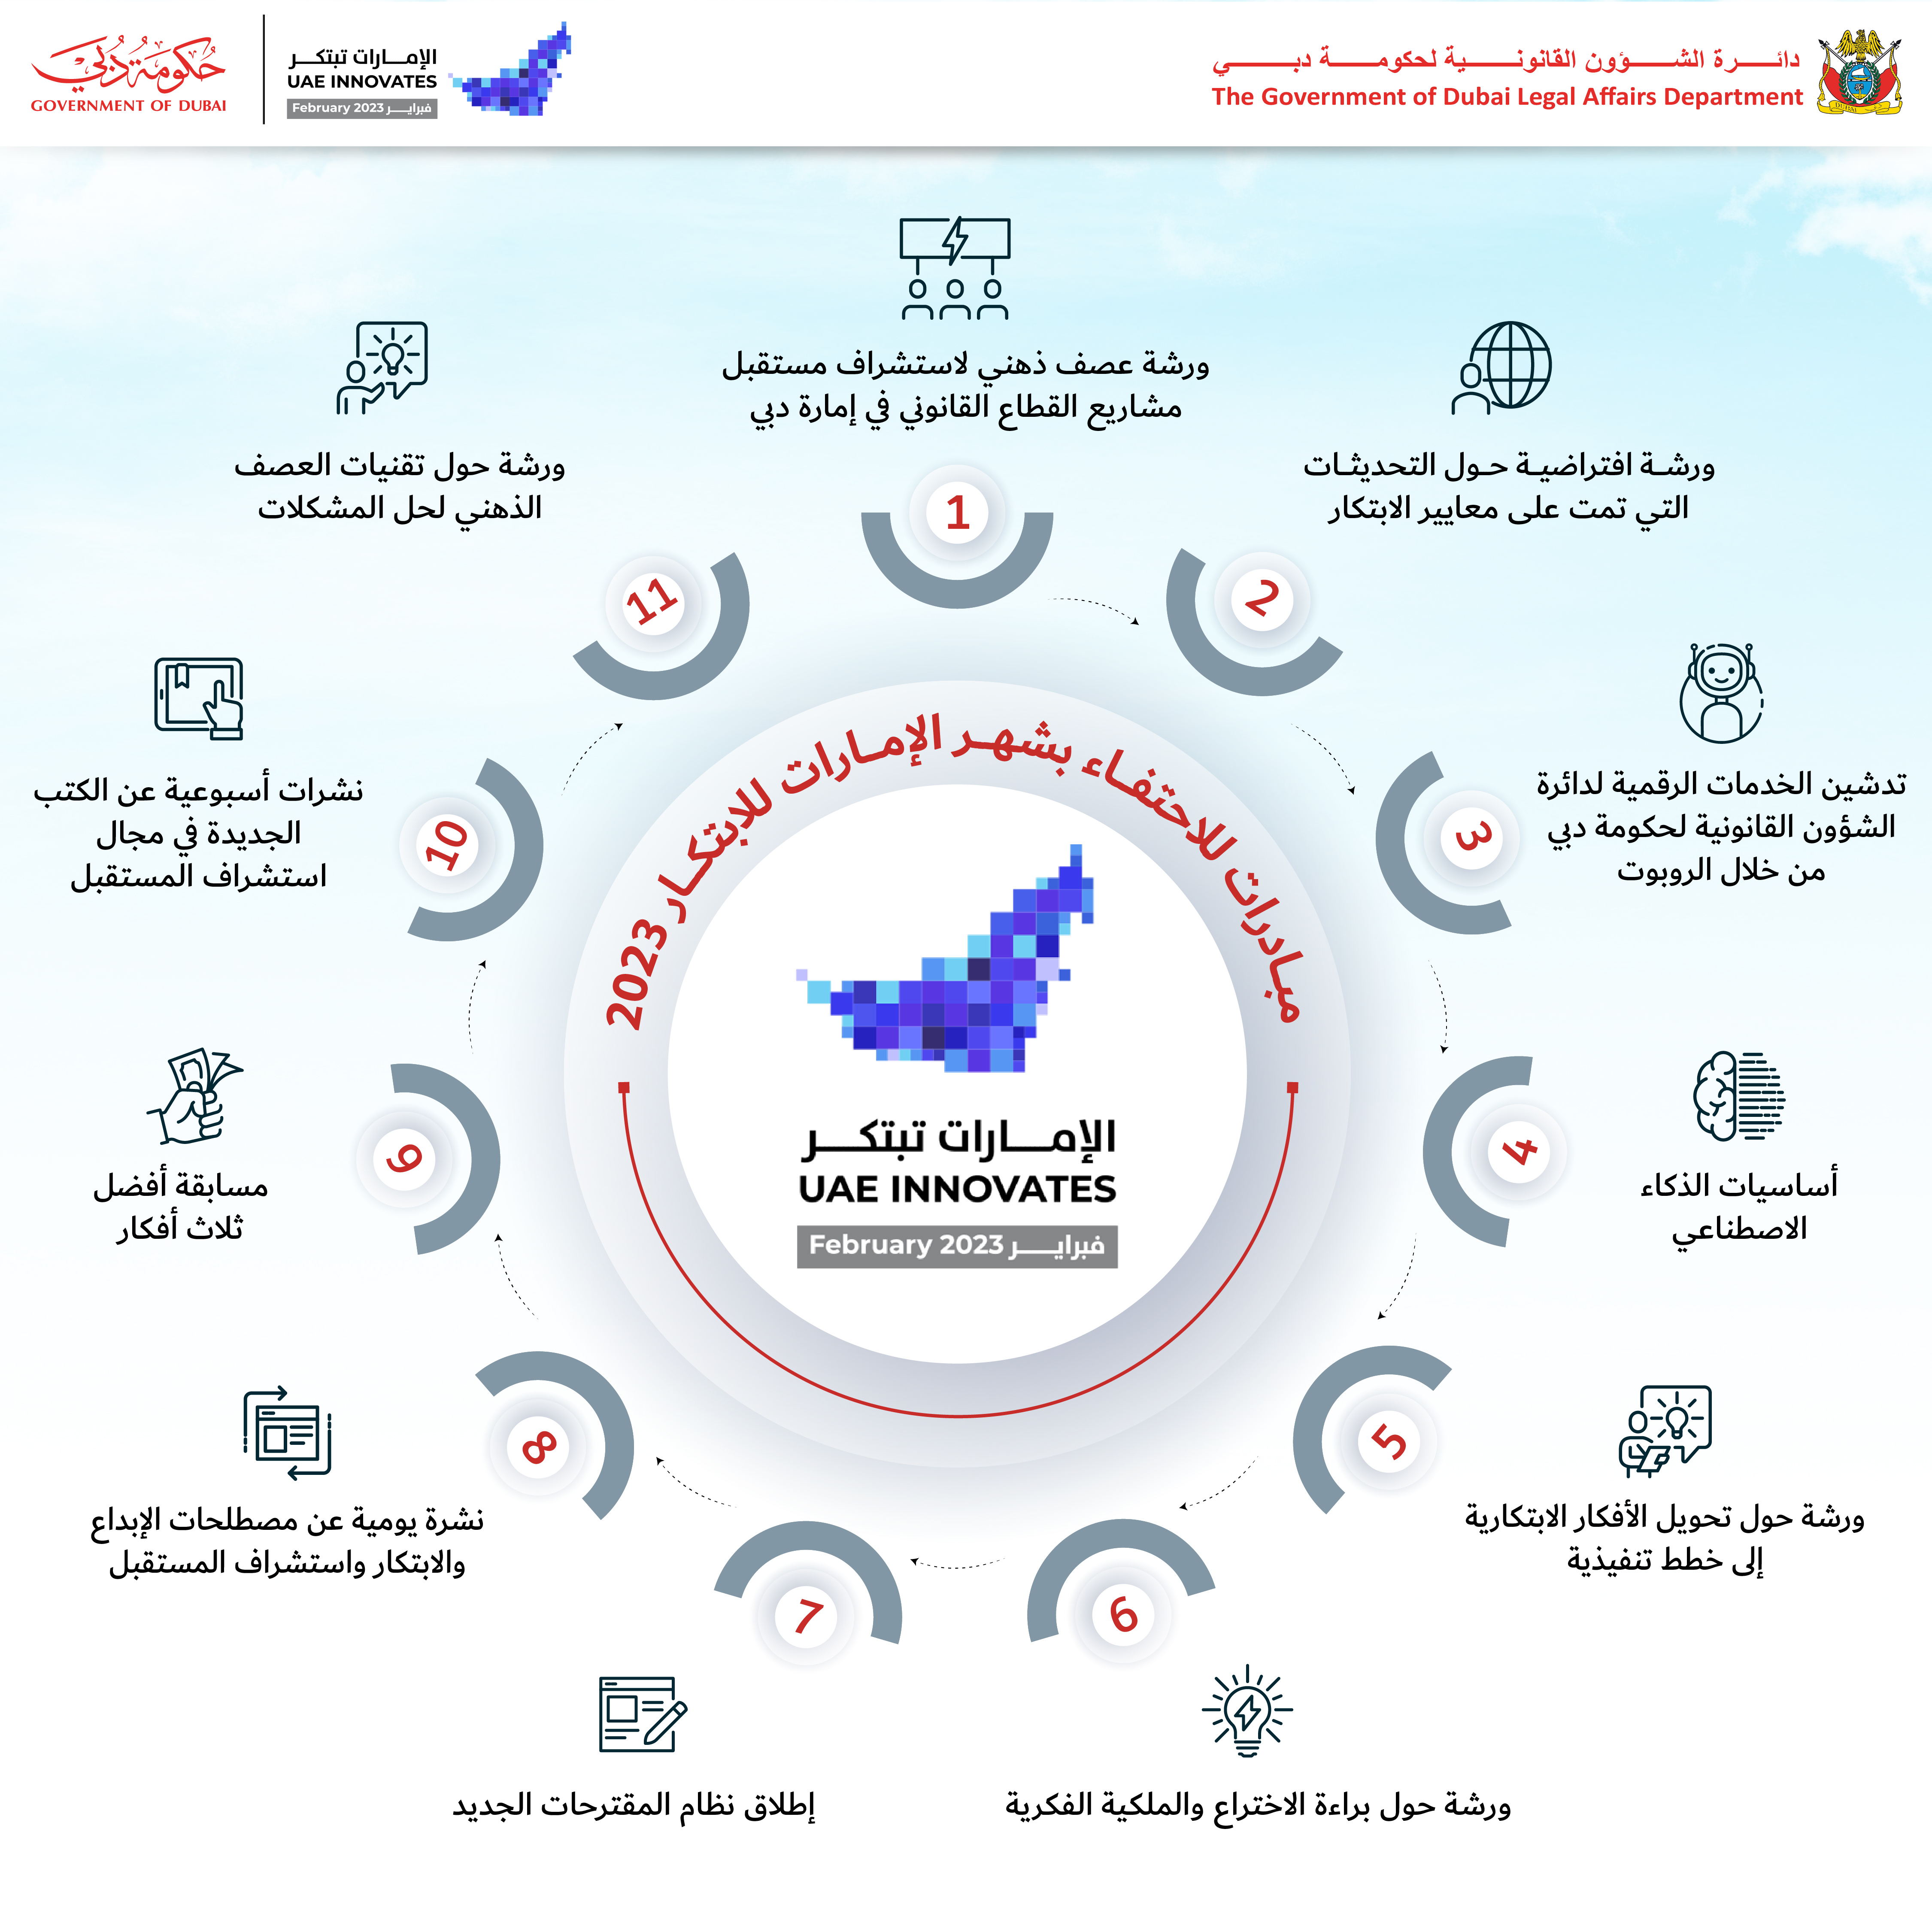 To enhance the capabilities of its human resources in shaping the future